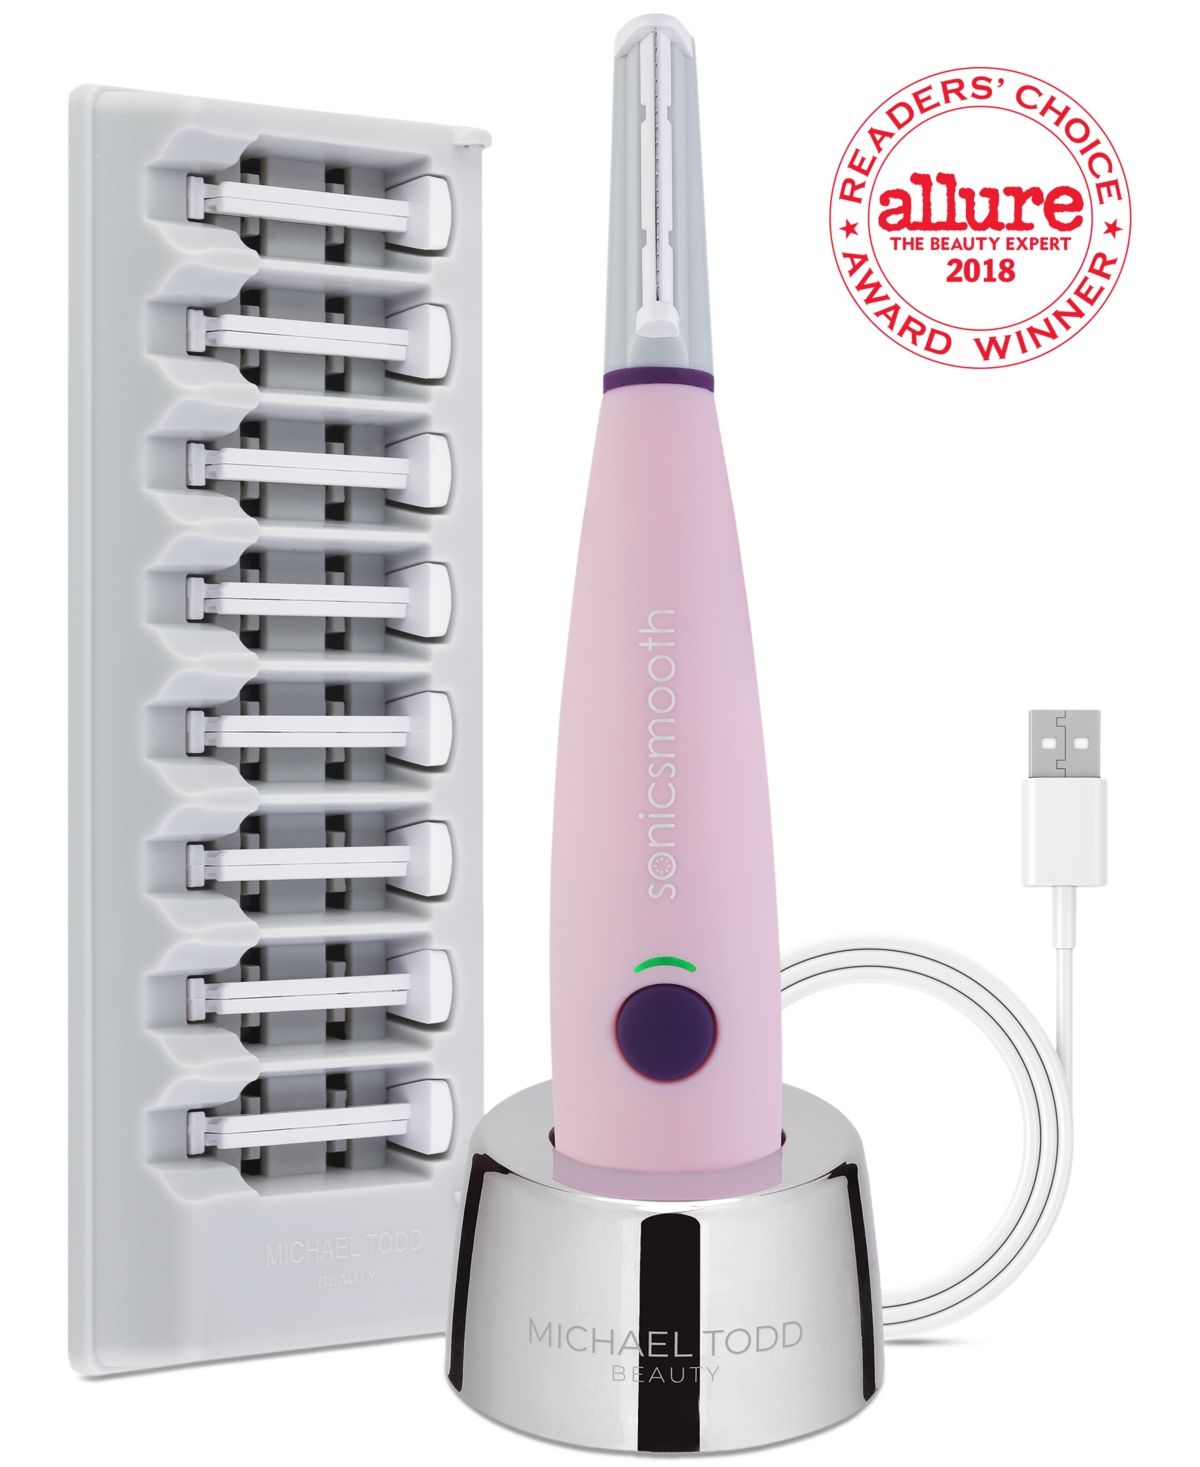 Sonicsmooth Sonic Dermaplaning 2 In 1 Facial Exfoliation & Peach Fuzz Hair Removal System - Pearl White